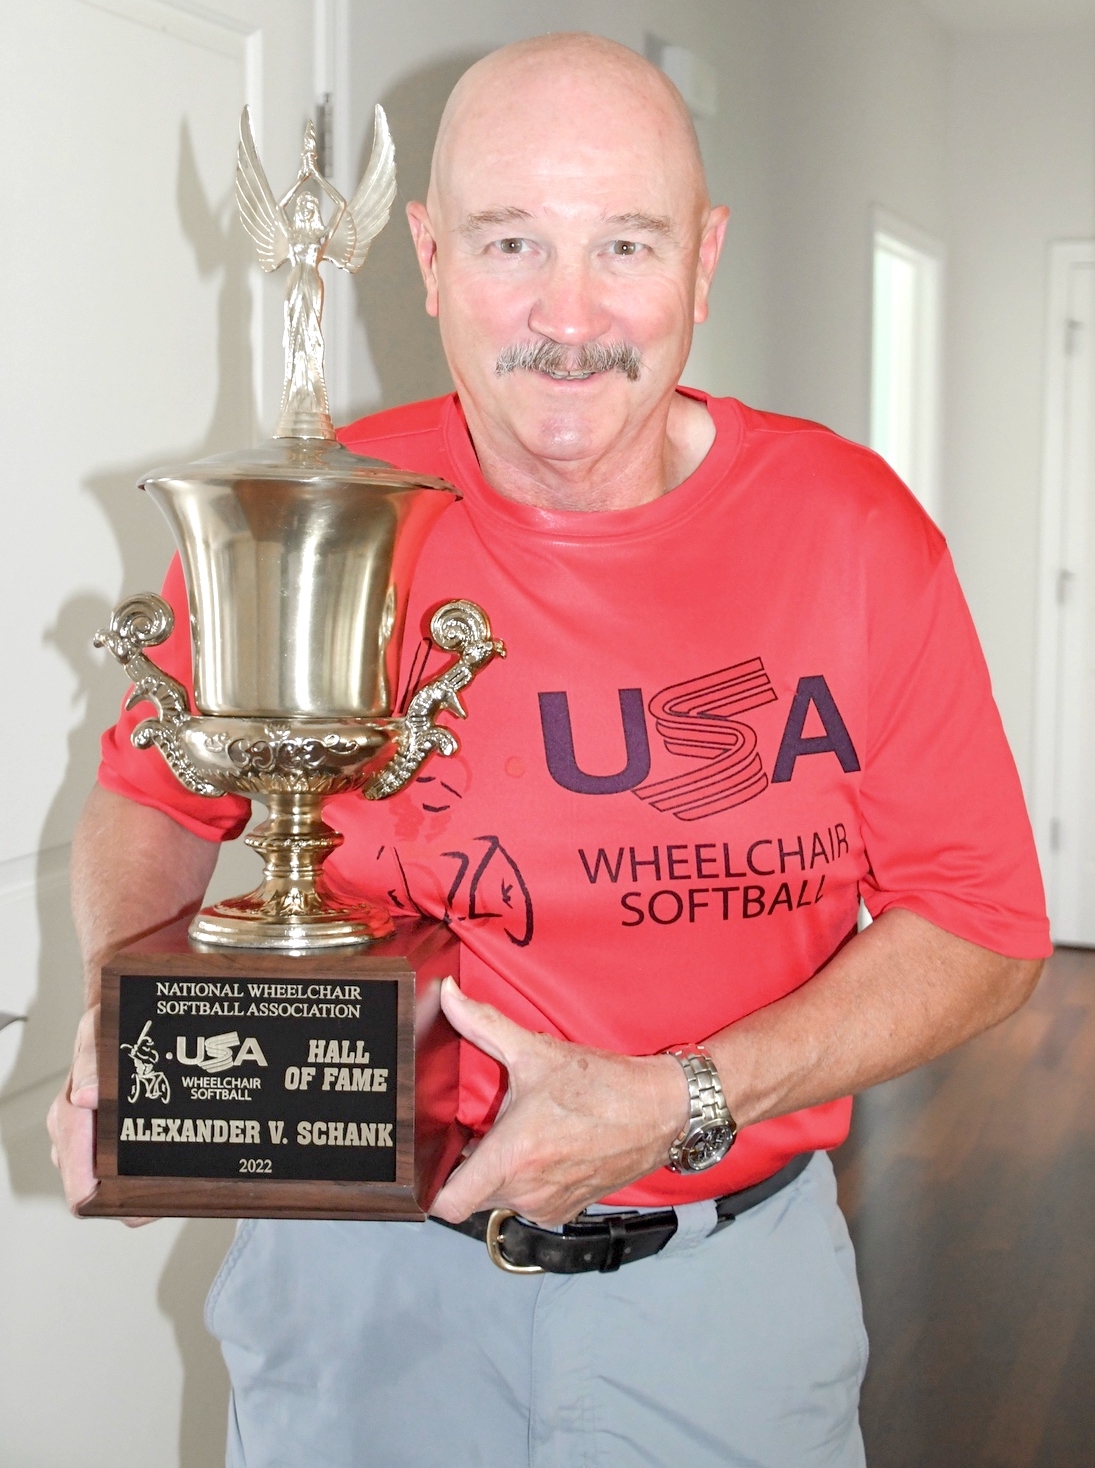 Alex Schank holds his trophy given to him for His Umpiring in the National Wheelchair Softball Association. (Photo by Christine Such/My Sun Day News)